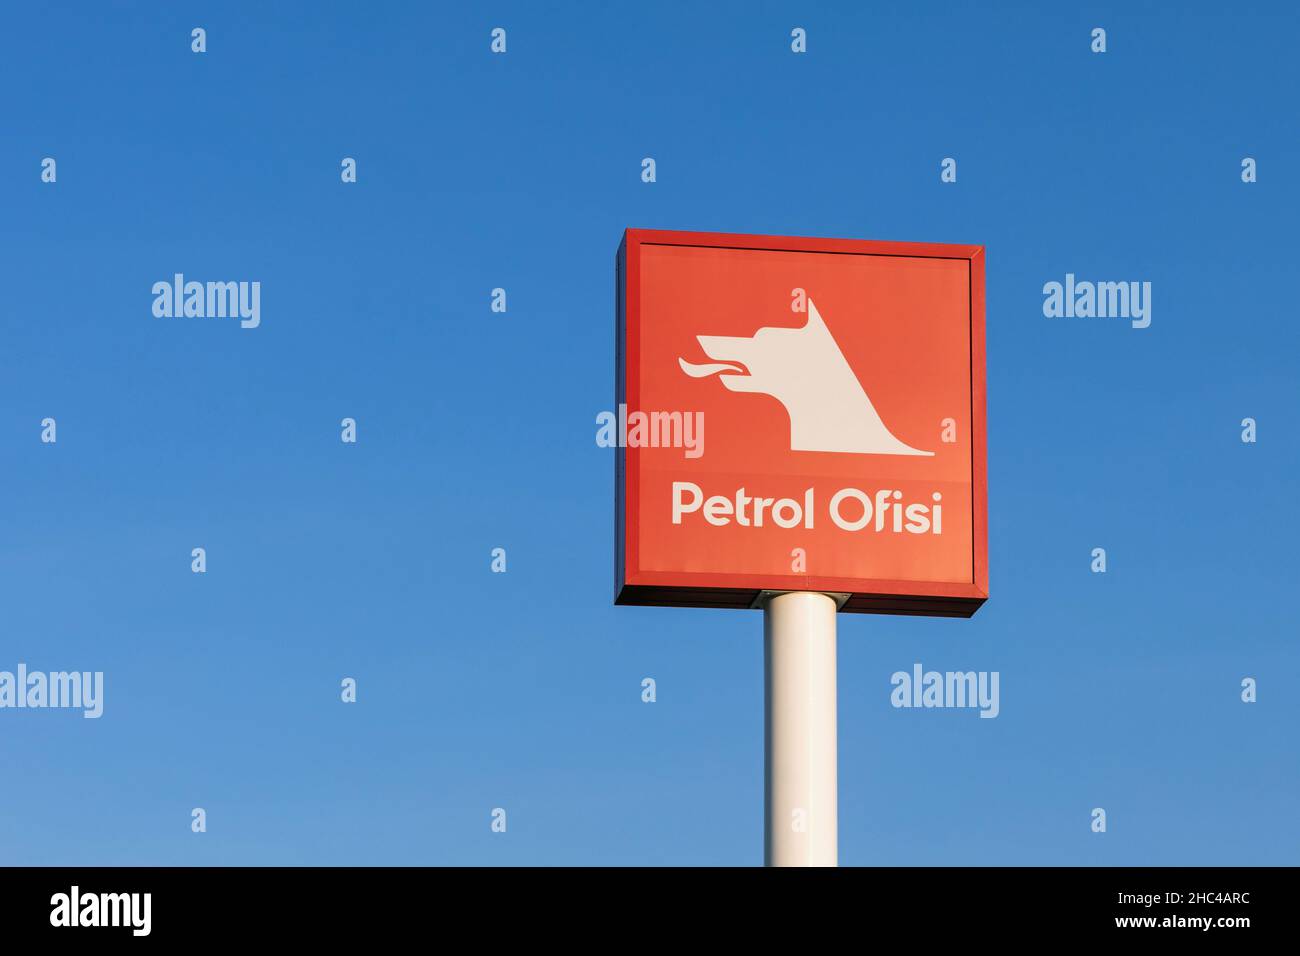 Turkish fuel products distribution and lubricants company Petrol Ofisi sign, symbol, logo Stock Photo